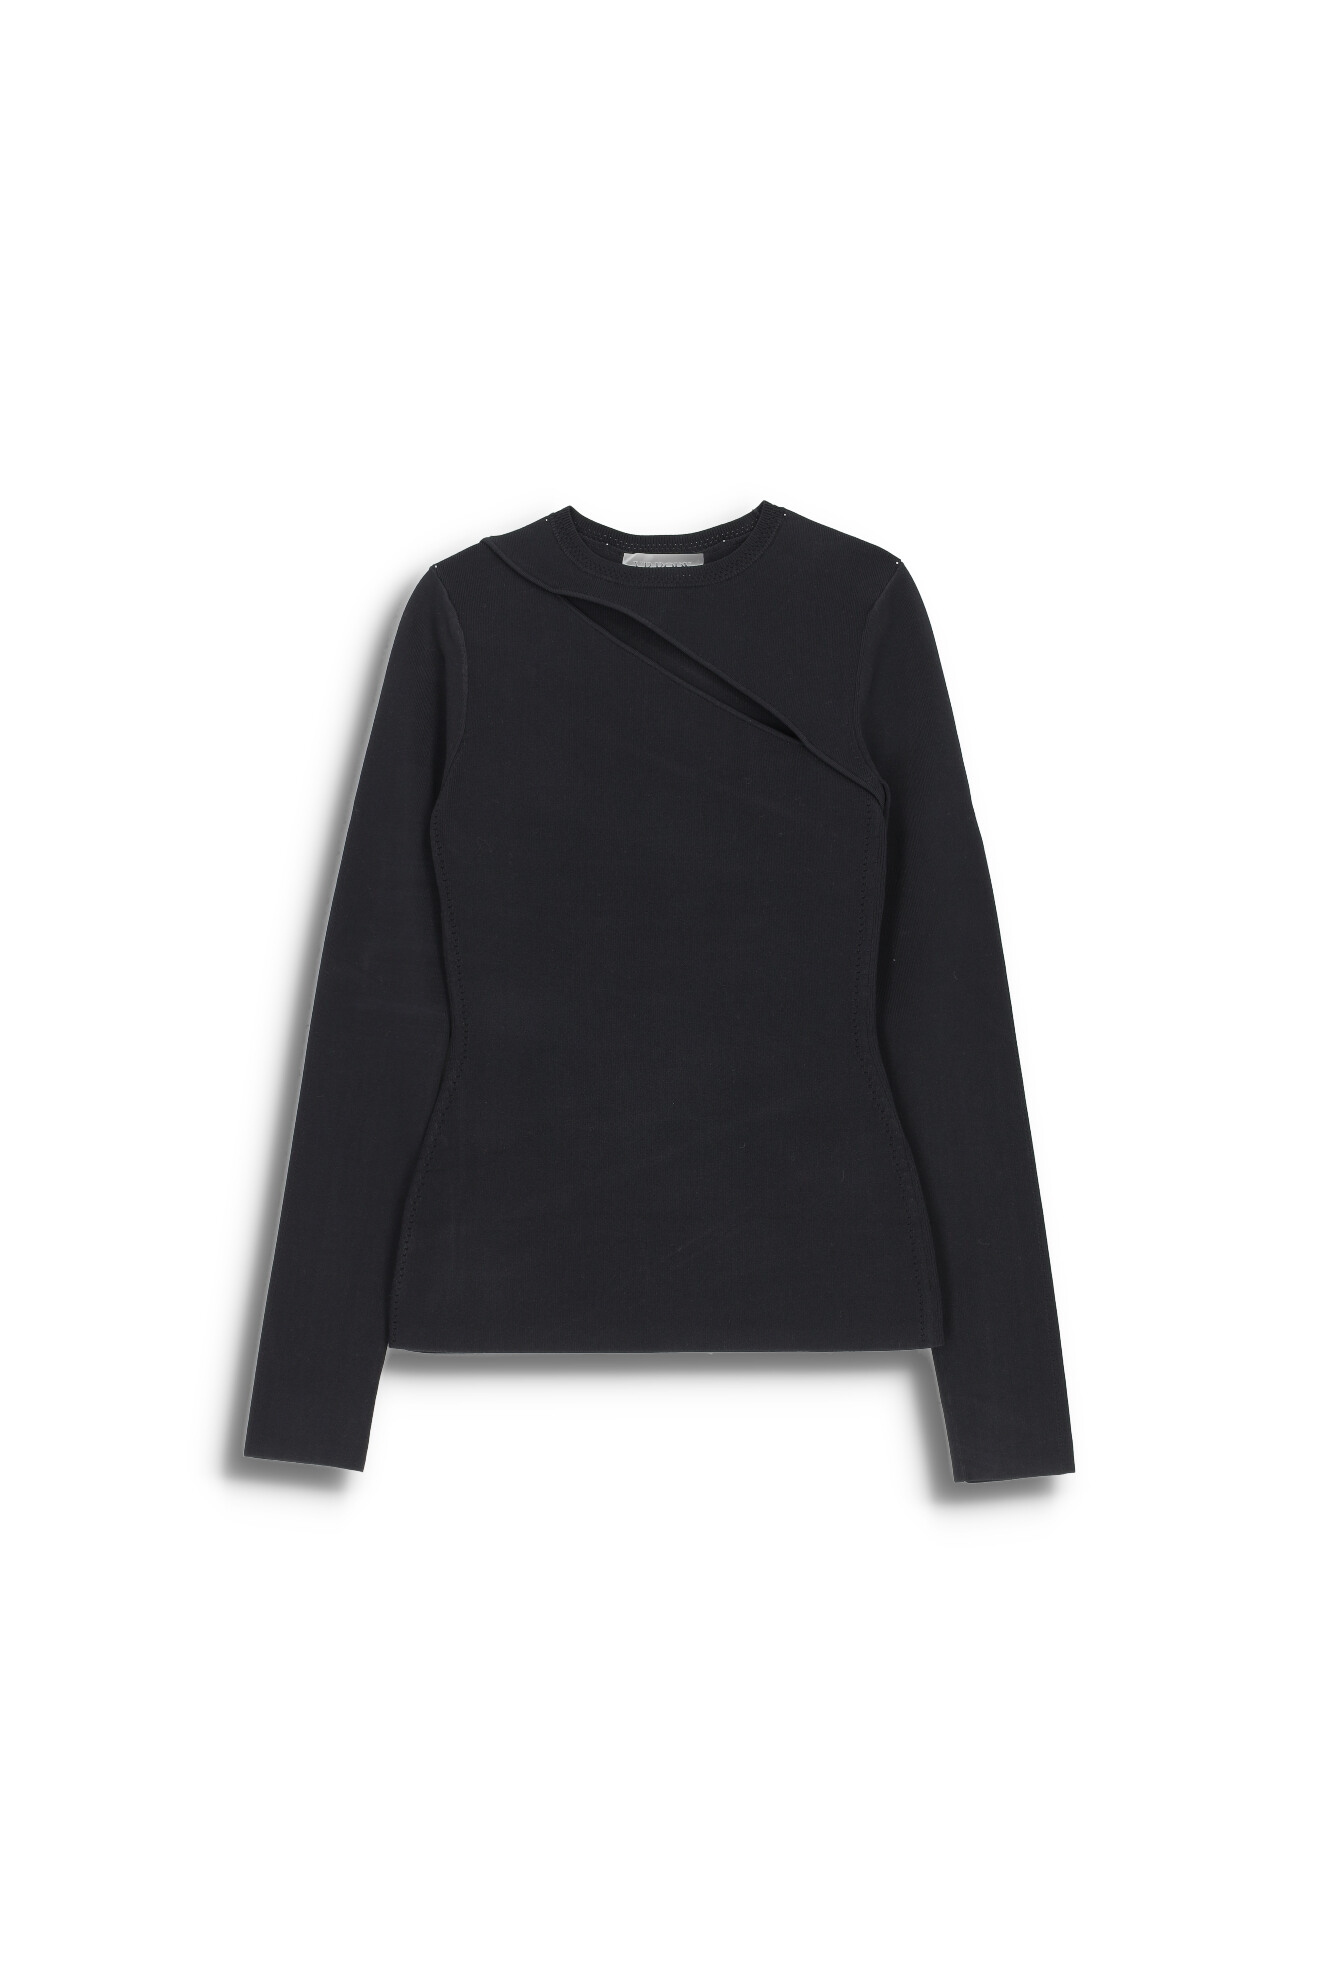 Victoria Beckham Cut Out Shirt - Figure-hugging long-sleeved shirt with cut-outs black 36